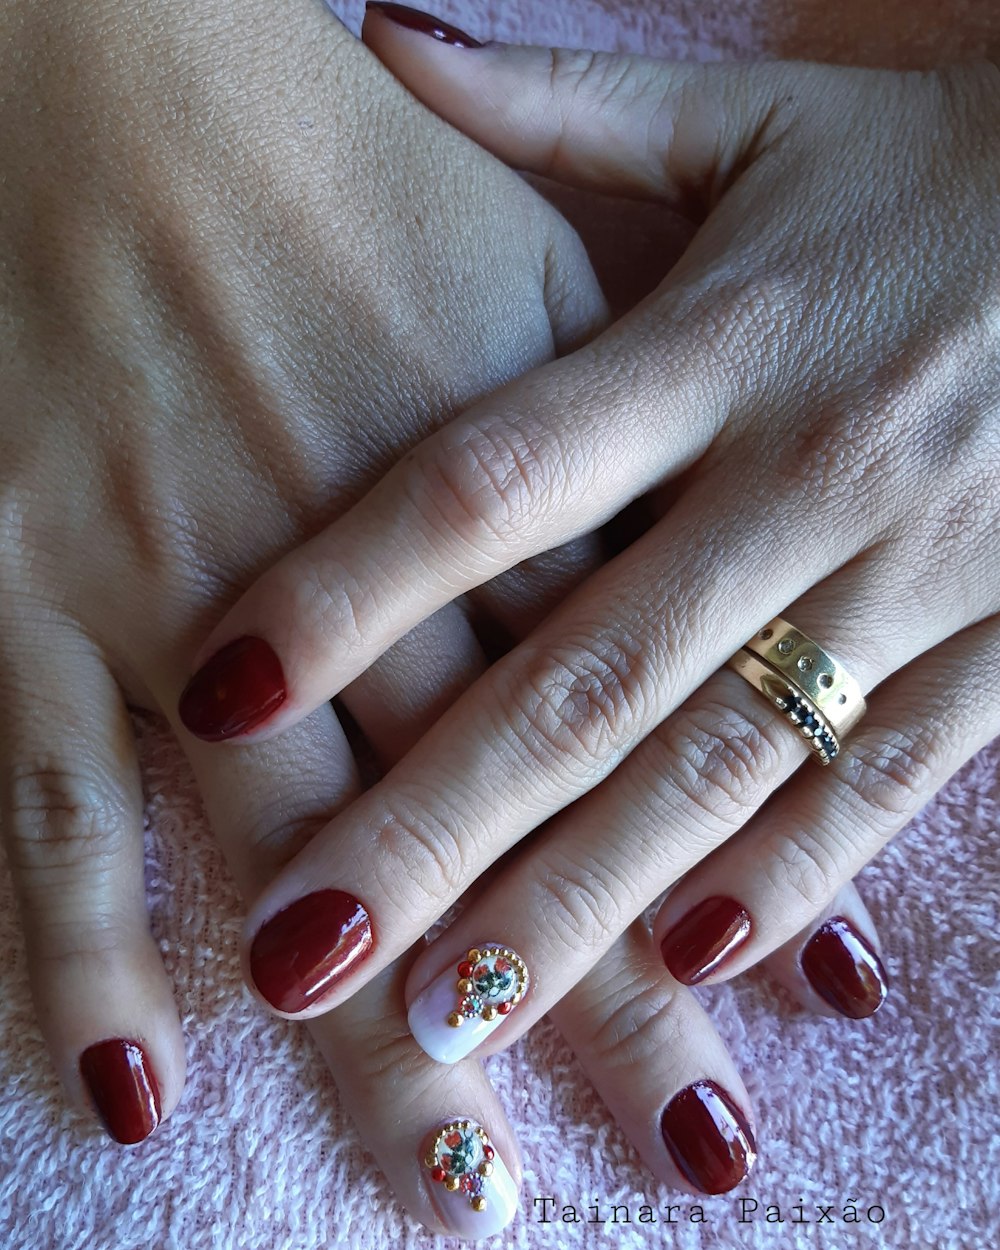 person with red and gold manicure